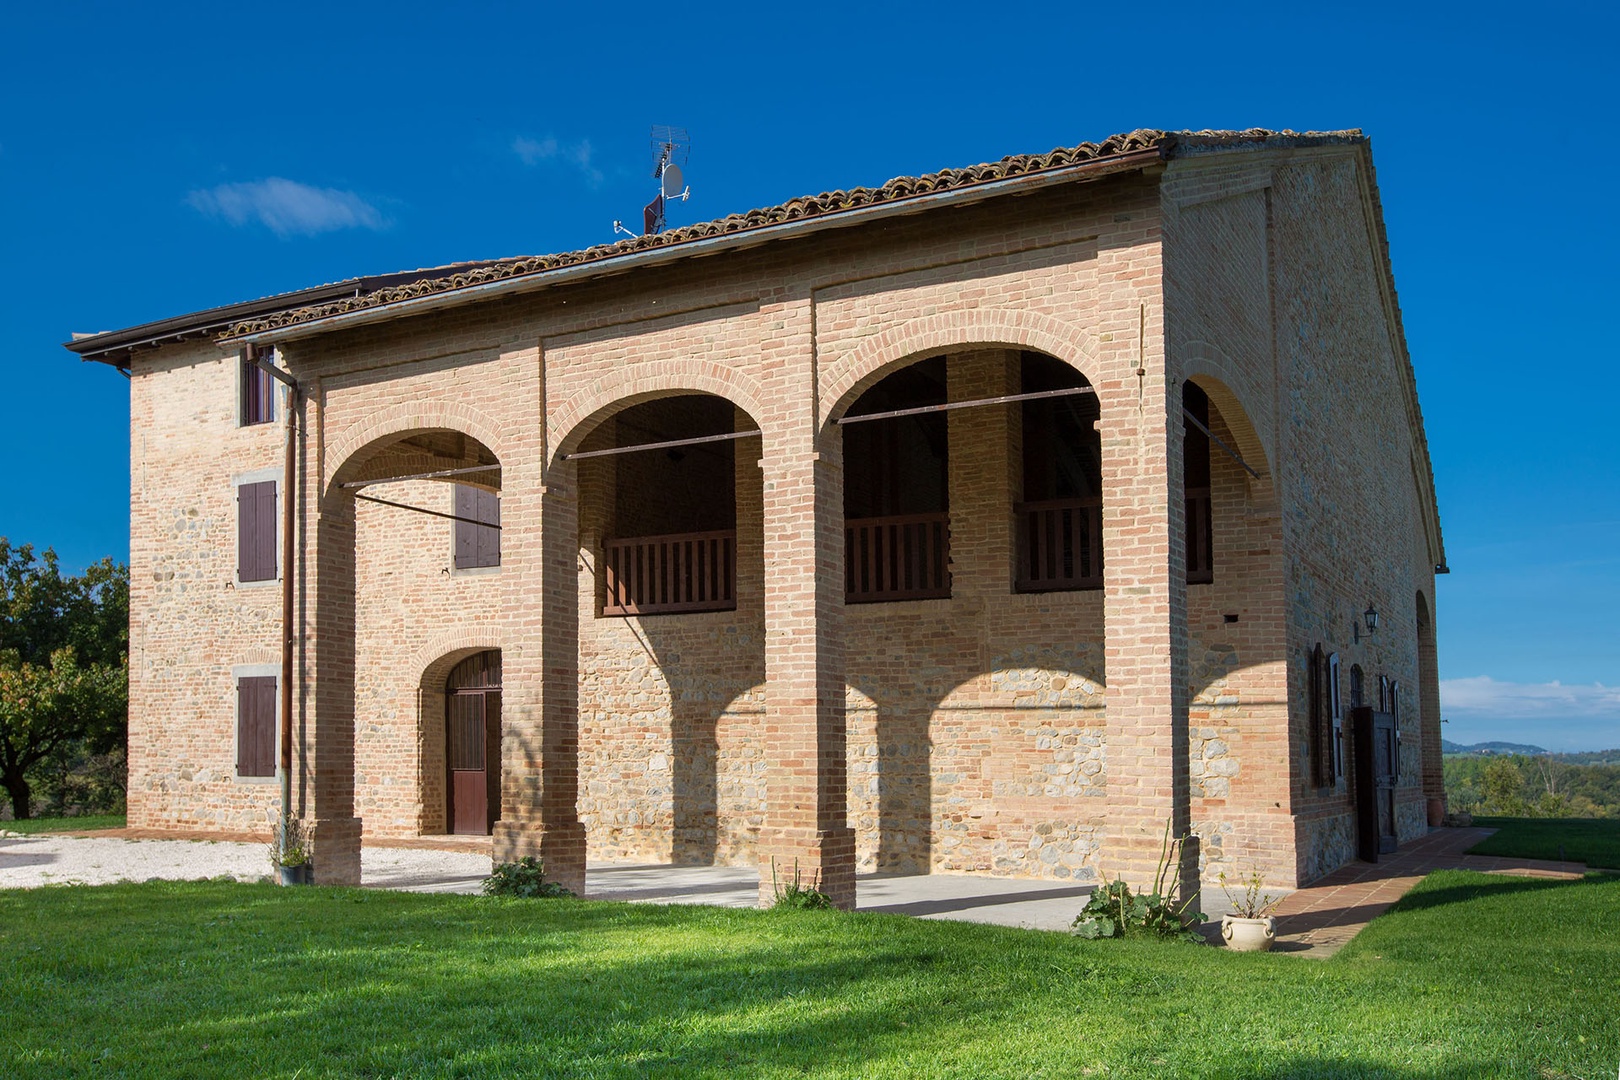 The front of the building has a covered terrace that mirrors the one on the back of the villa.